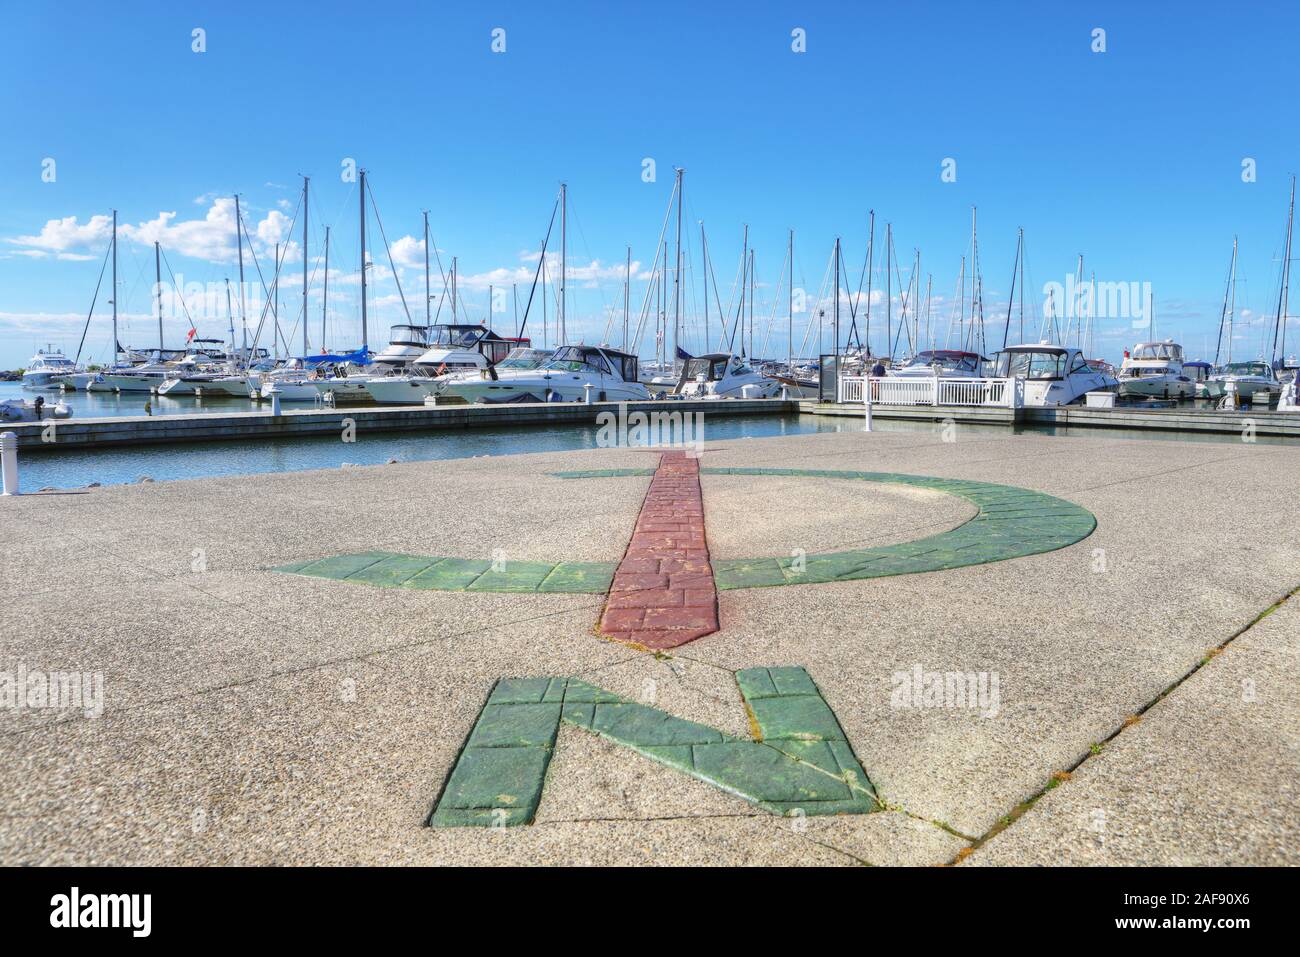 A View of the marina in Oakville in Ontario, Canada Stock Photo